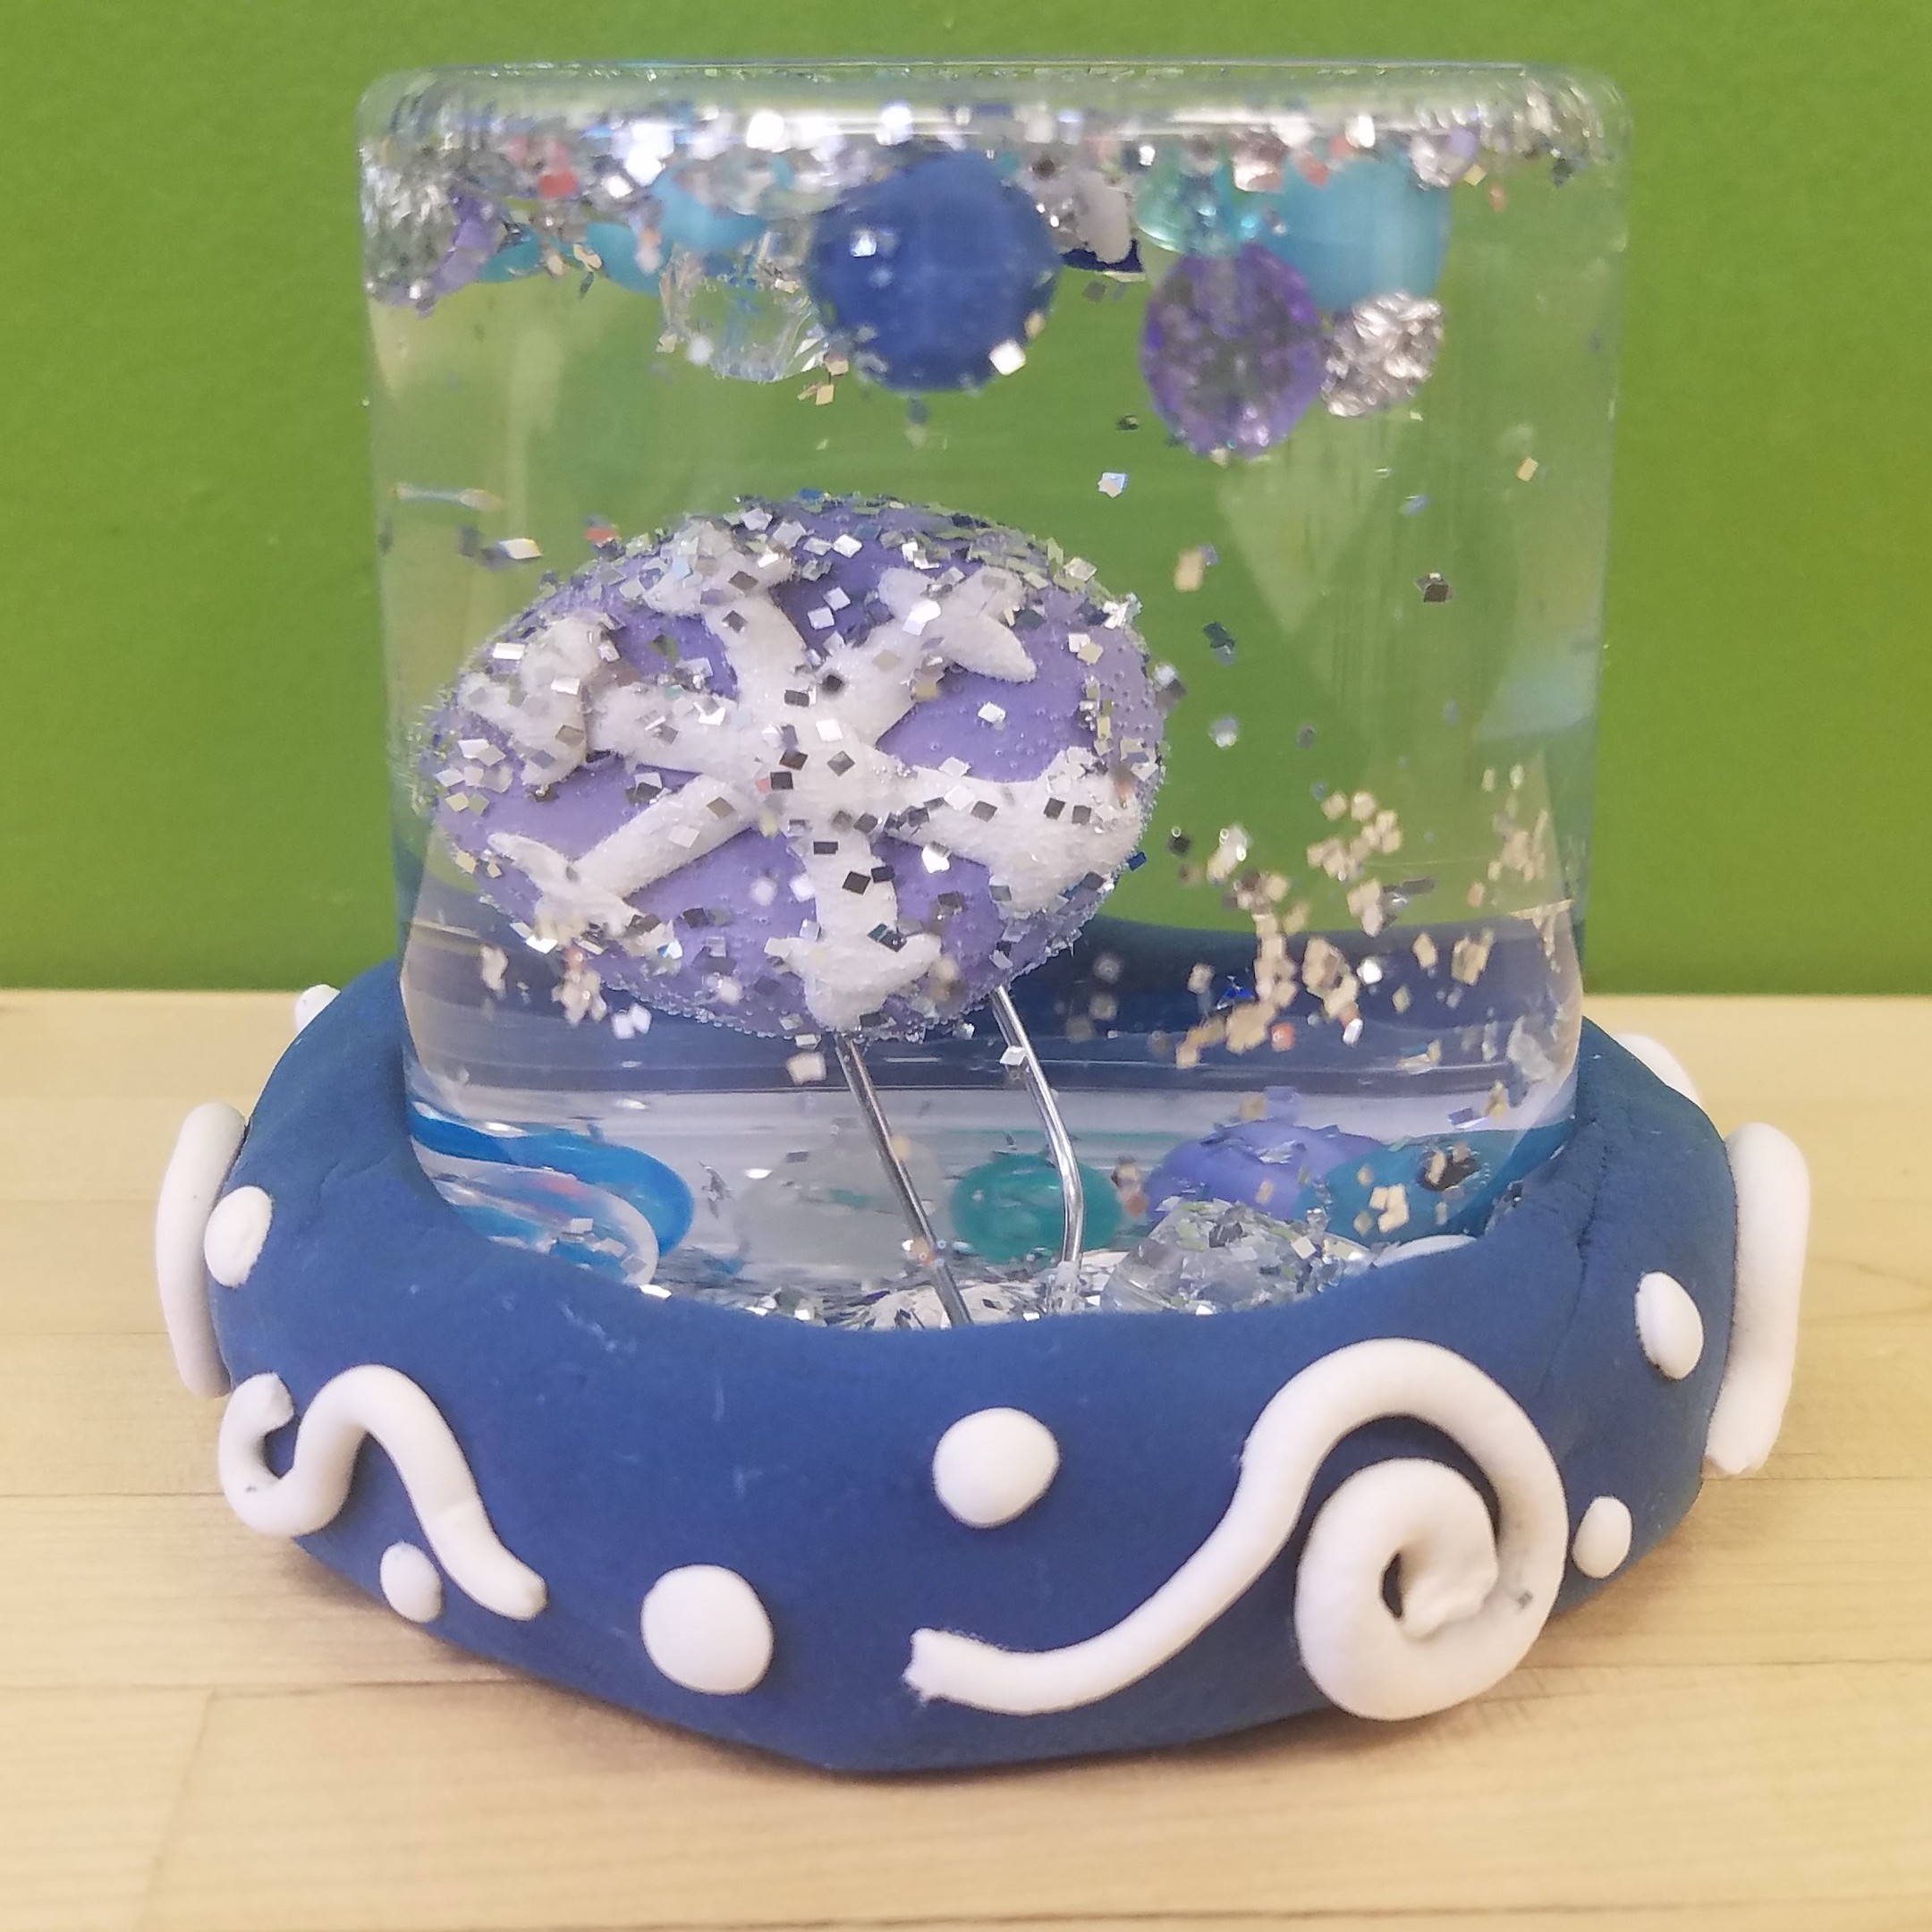 Kidcreate Studio - Houston Greater Heights, How to Make a Snow Globe Art Project